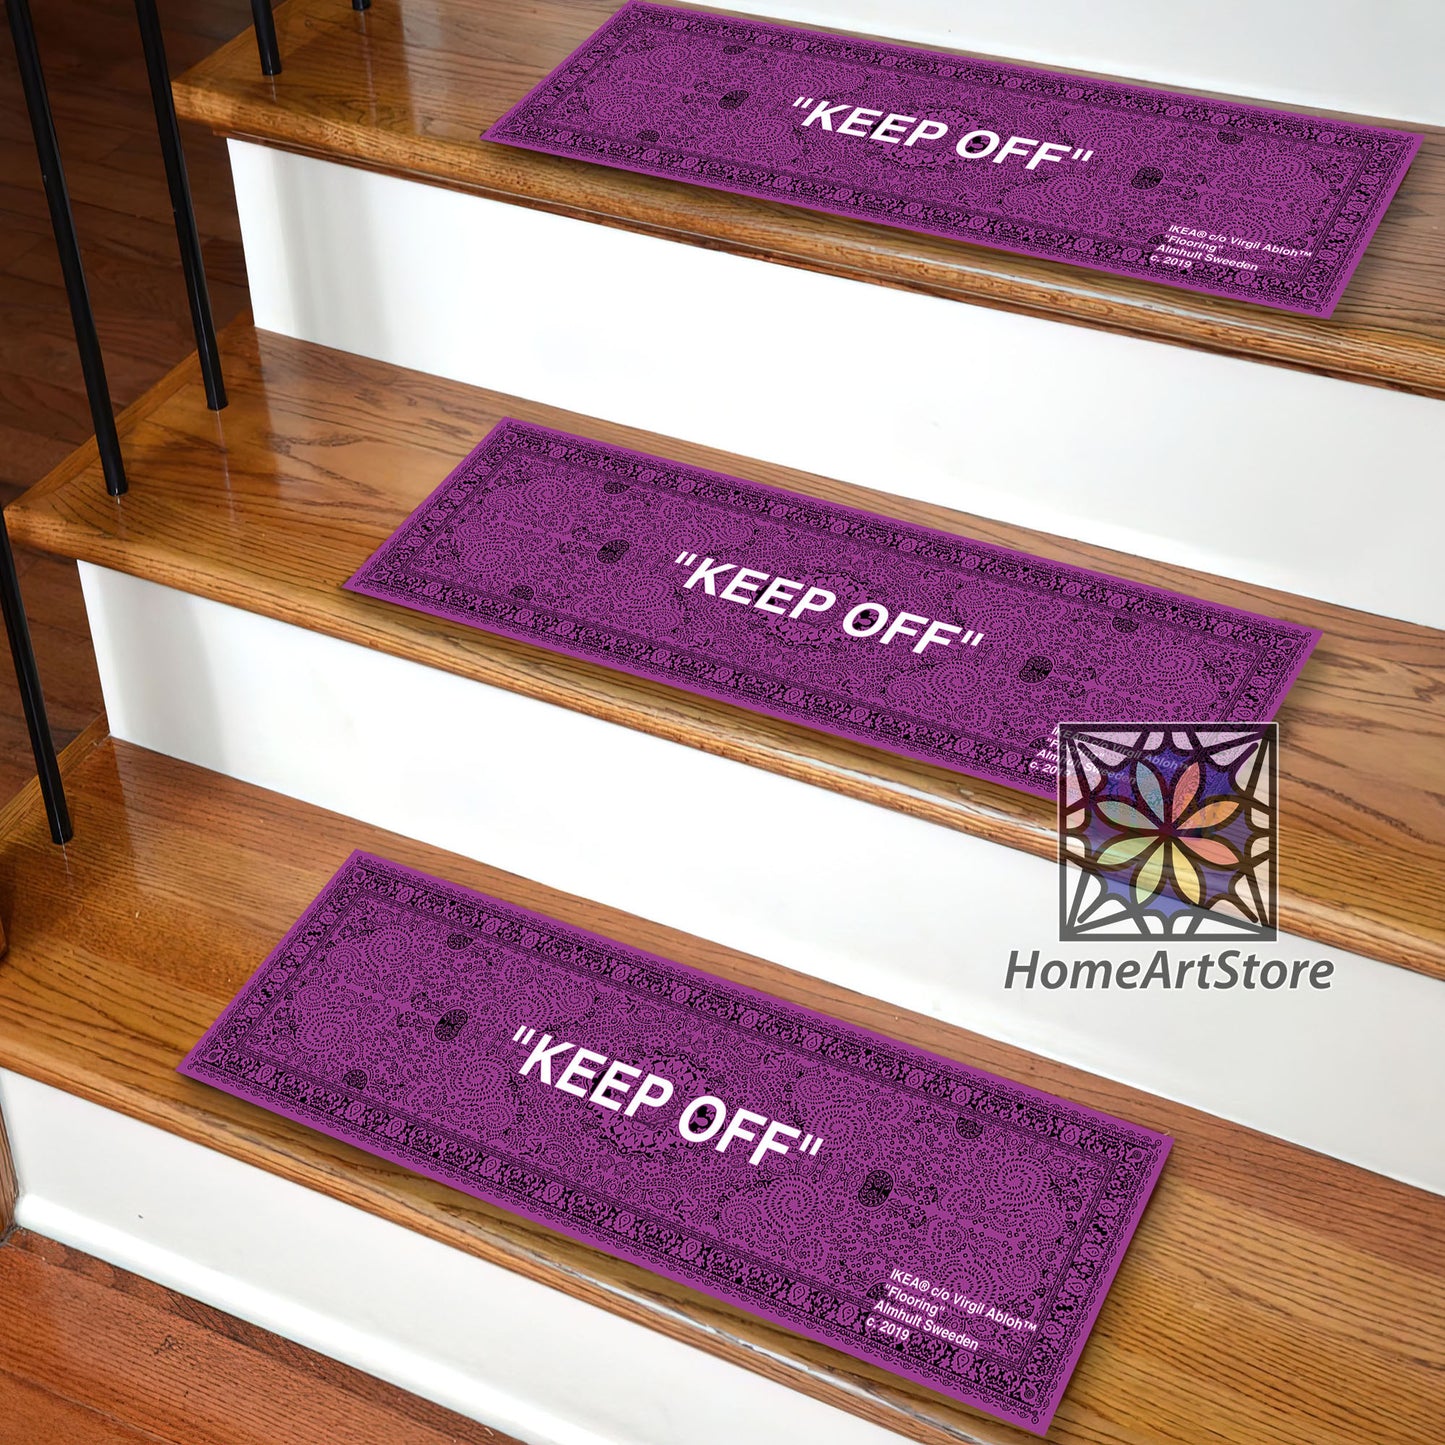 Keep Off Stair Rugs, Hypebeast Stair Step Mats, Purple and White Keepoff Carpet, Sneaker Decor, Street Fashion